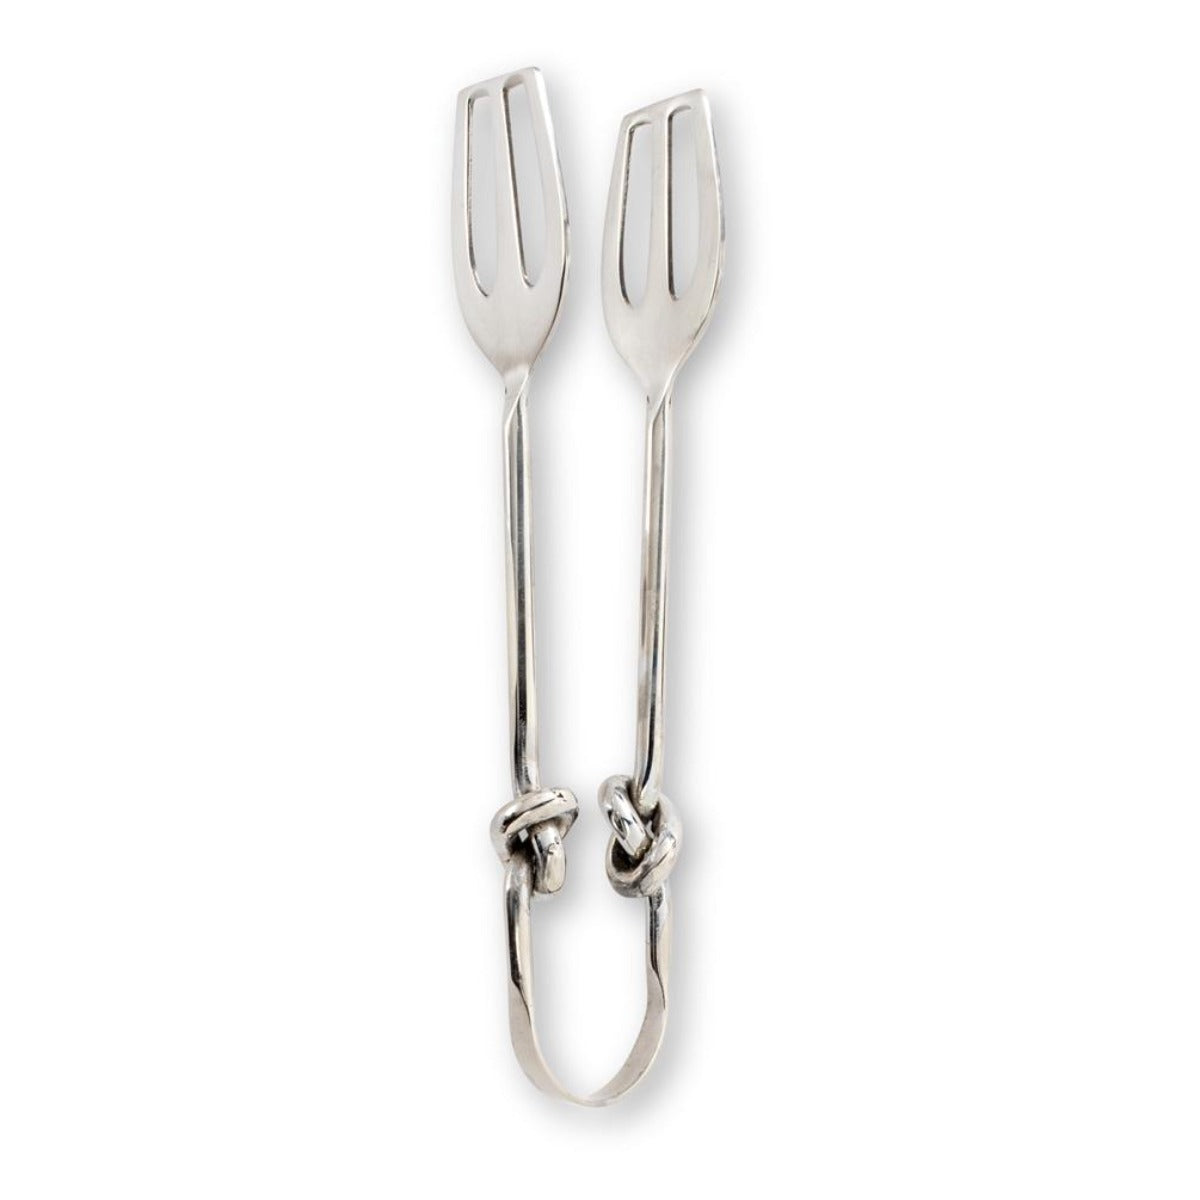 Knotted Serving Tongs Set-2